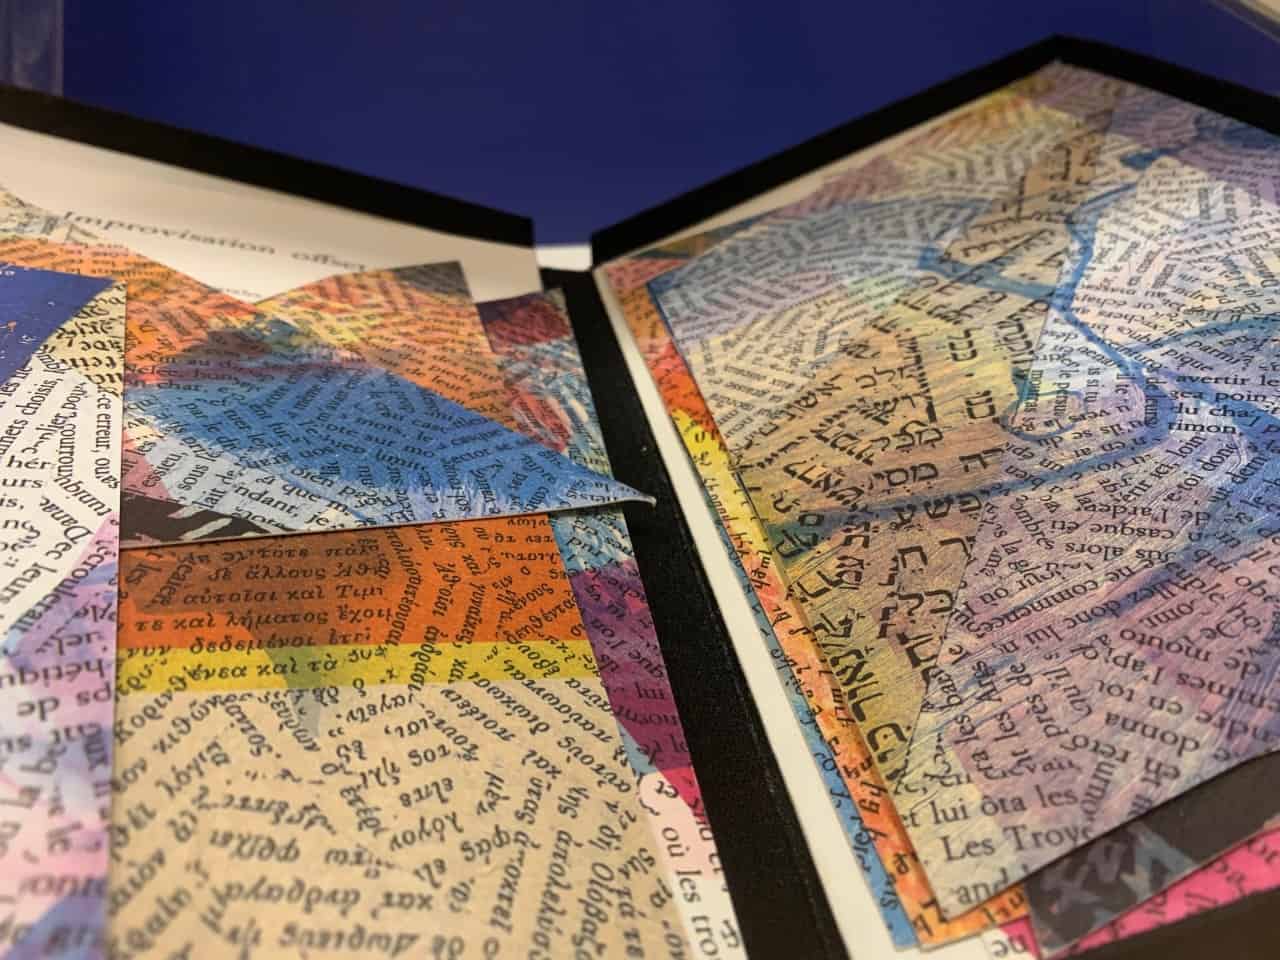 The image shows colorful papers in many sizes of triangular shapes covered in words from various languages.